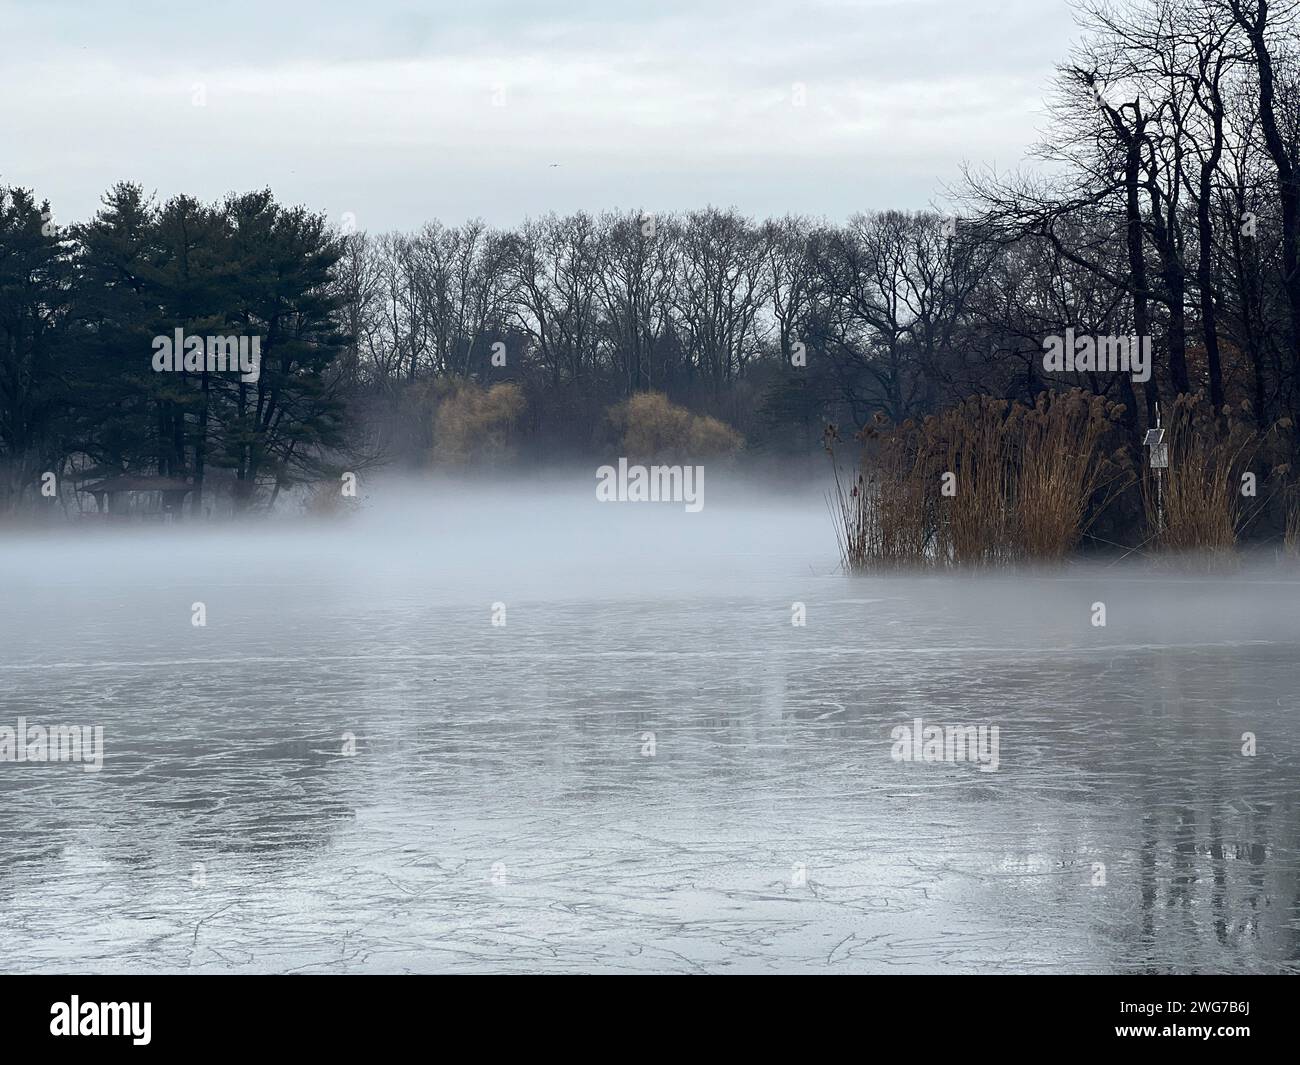 Mist rising off the lake on a rainy winter day in Prospect Park, Brooklyn, New York. Stock Photo